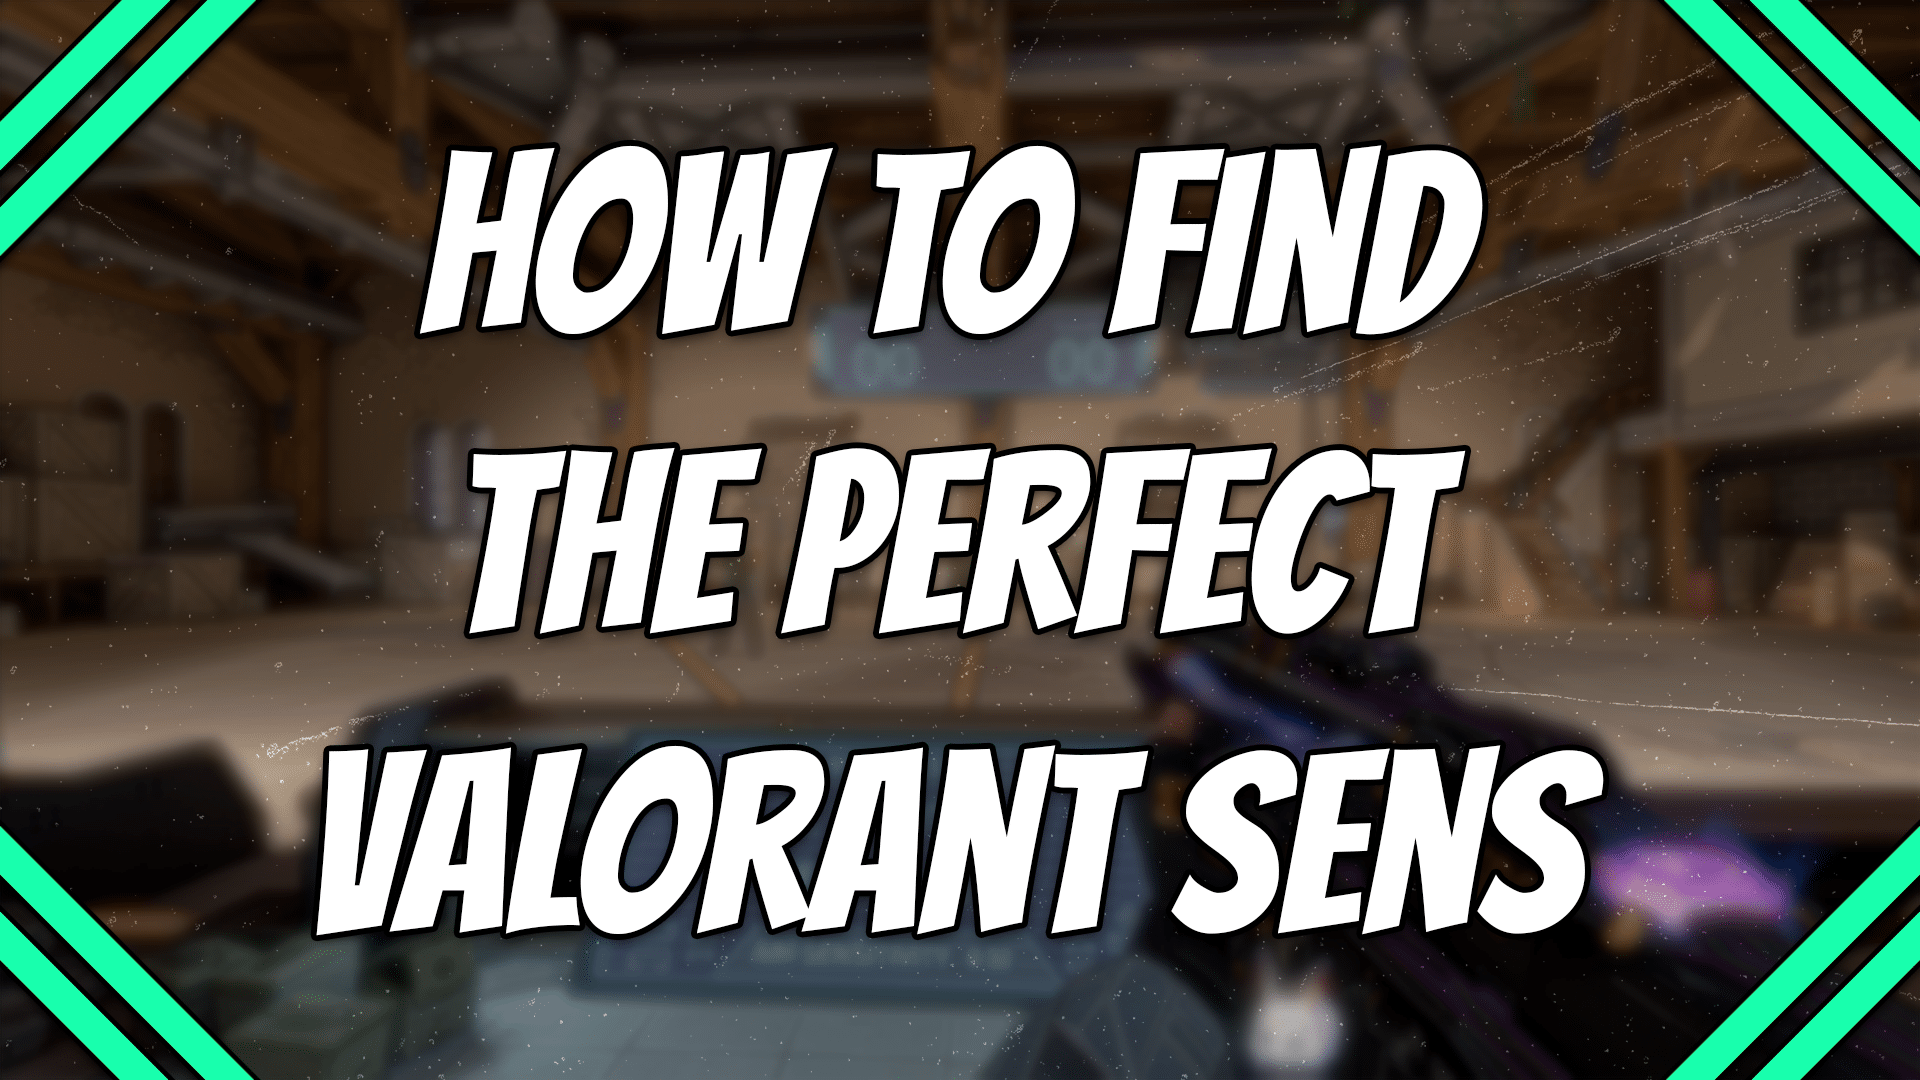 how to find the perfect Valorant sens title card